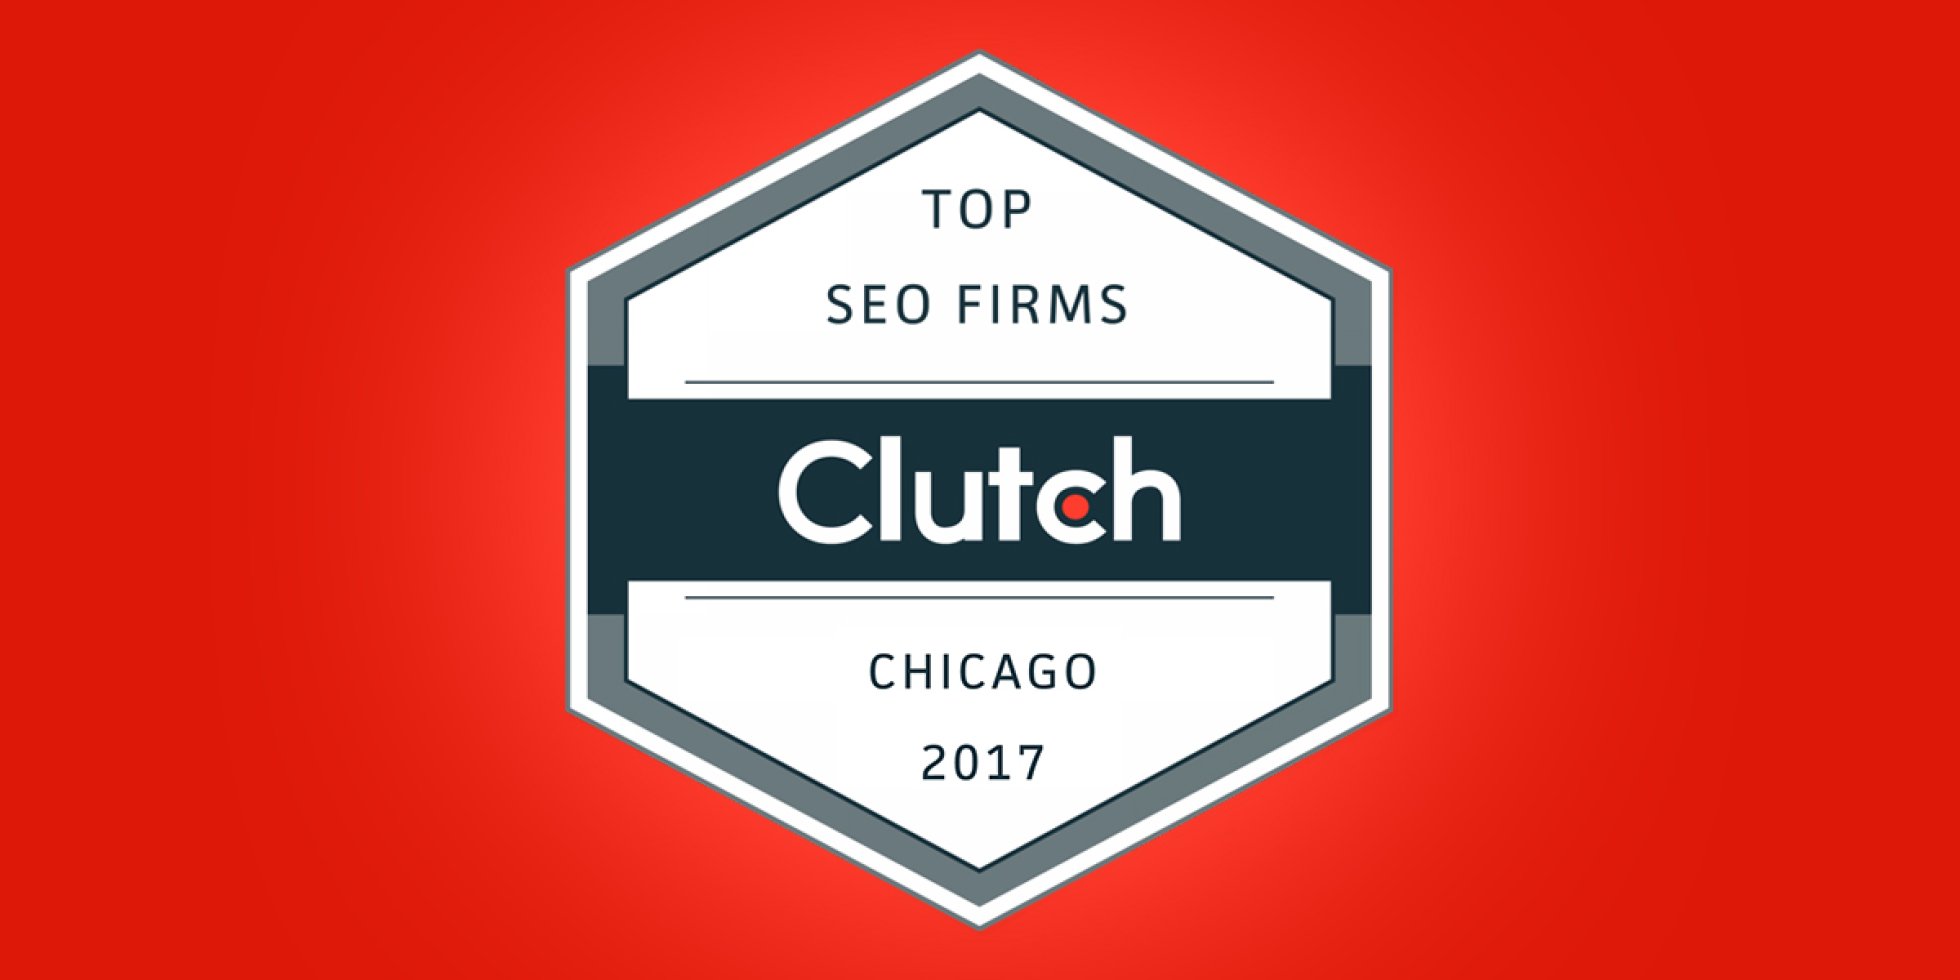 EDUCO Named Top SEO Firm by Clutch